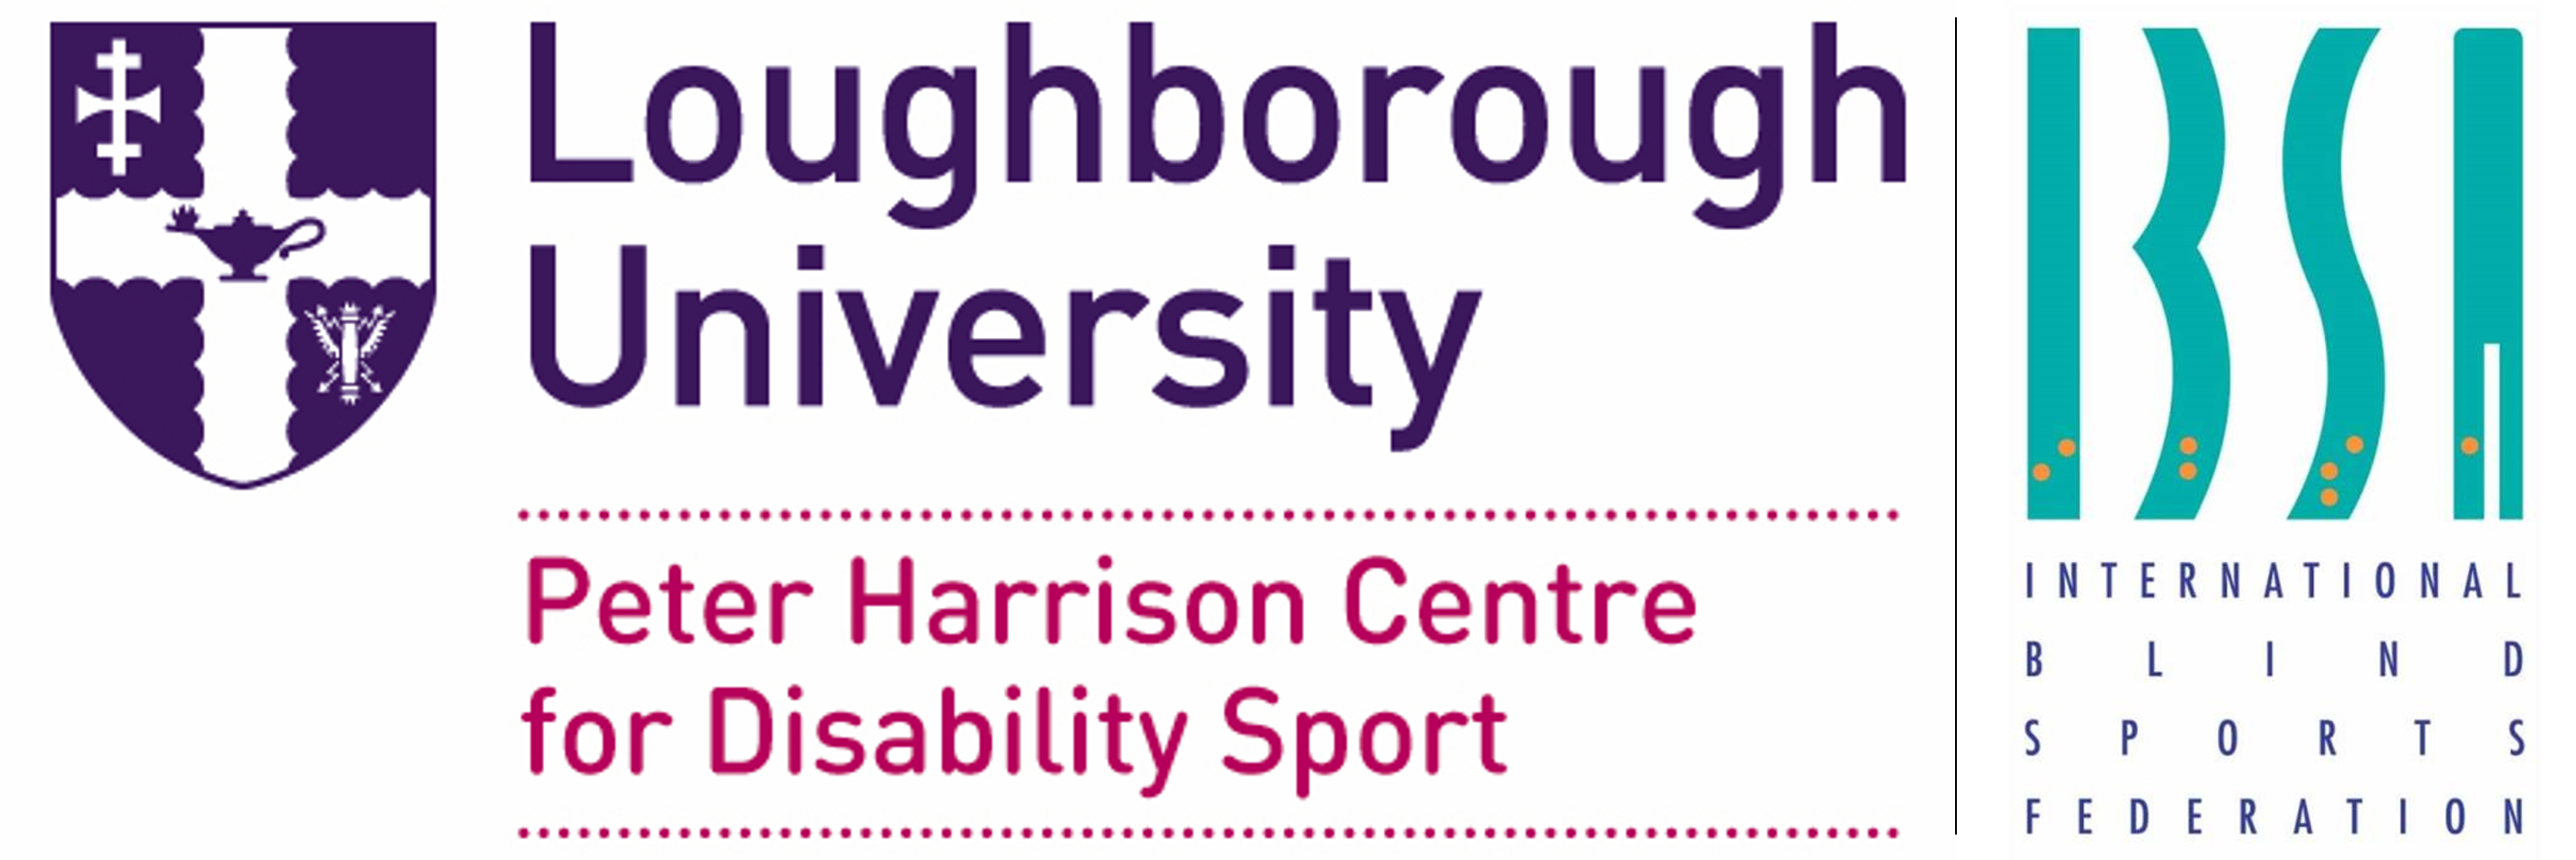 Loughborough University logo on the left, International Blind Sports Federation logo on the right. Underneath, wording that reads 